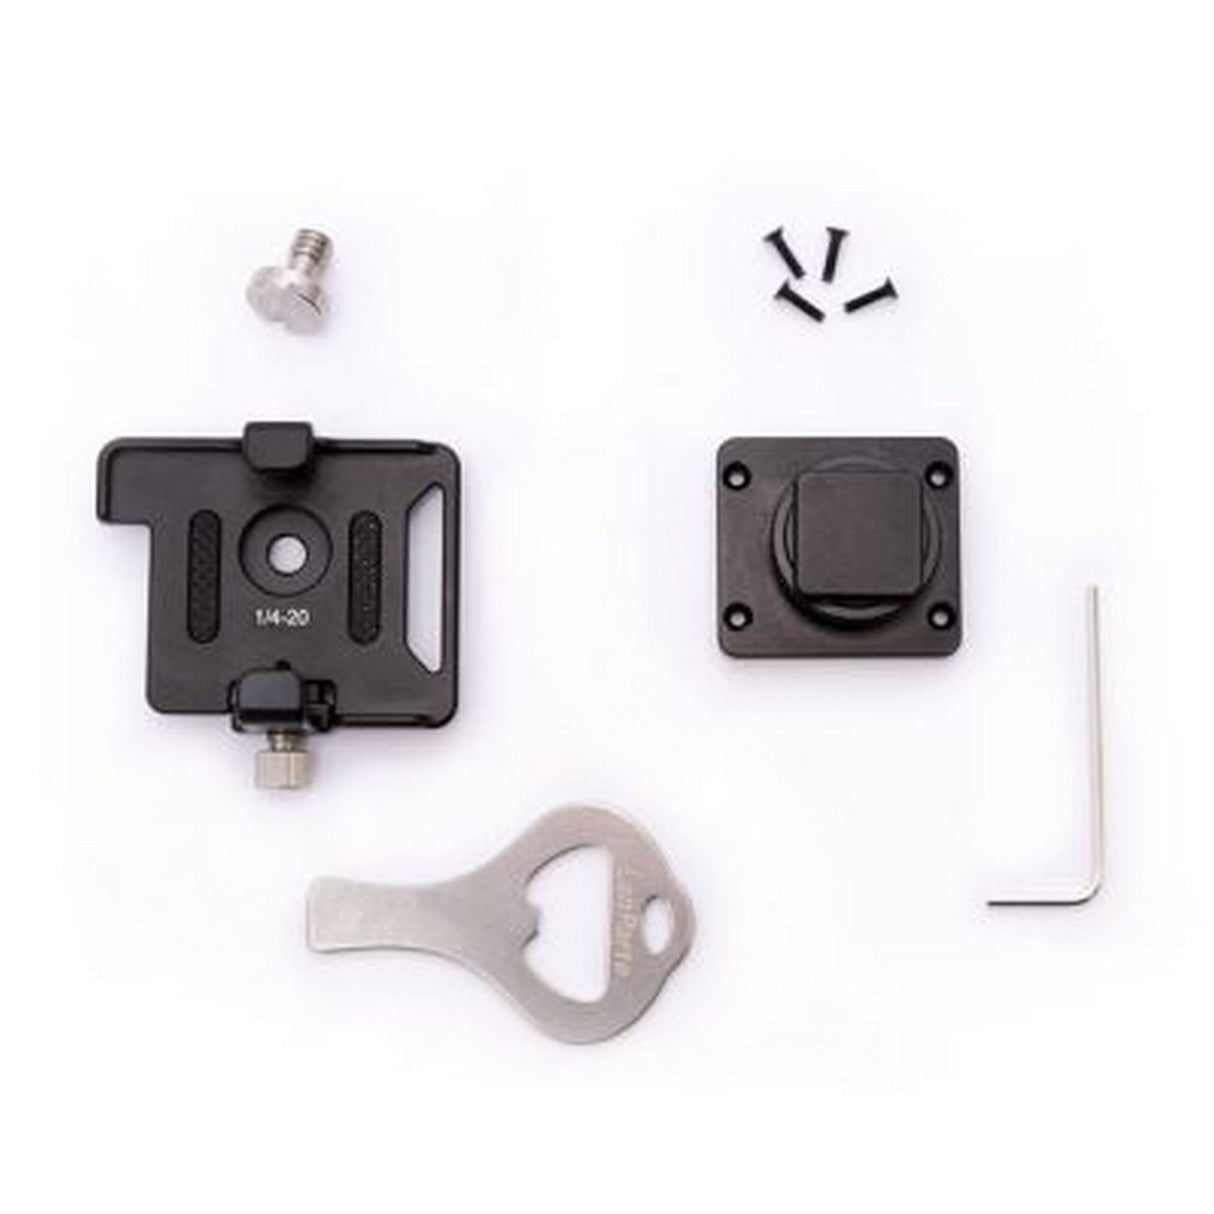 Tentacle Sync E Bracket with Cold Shoe Mount